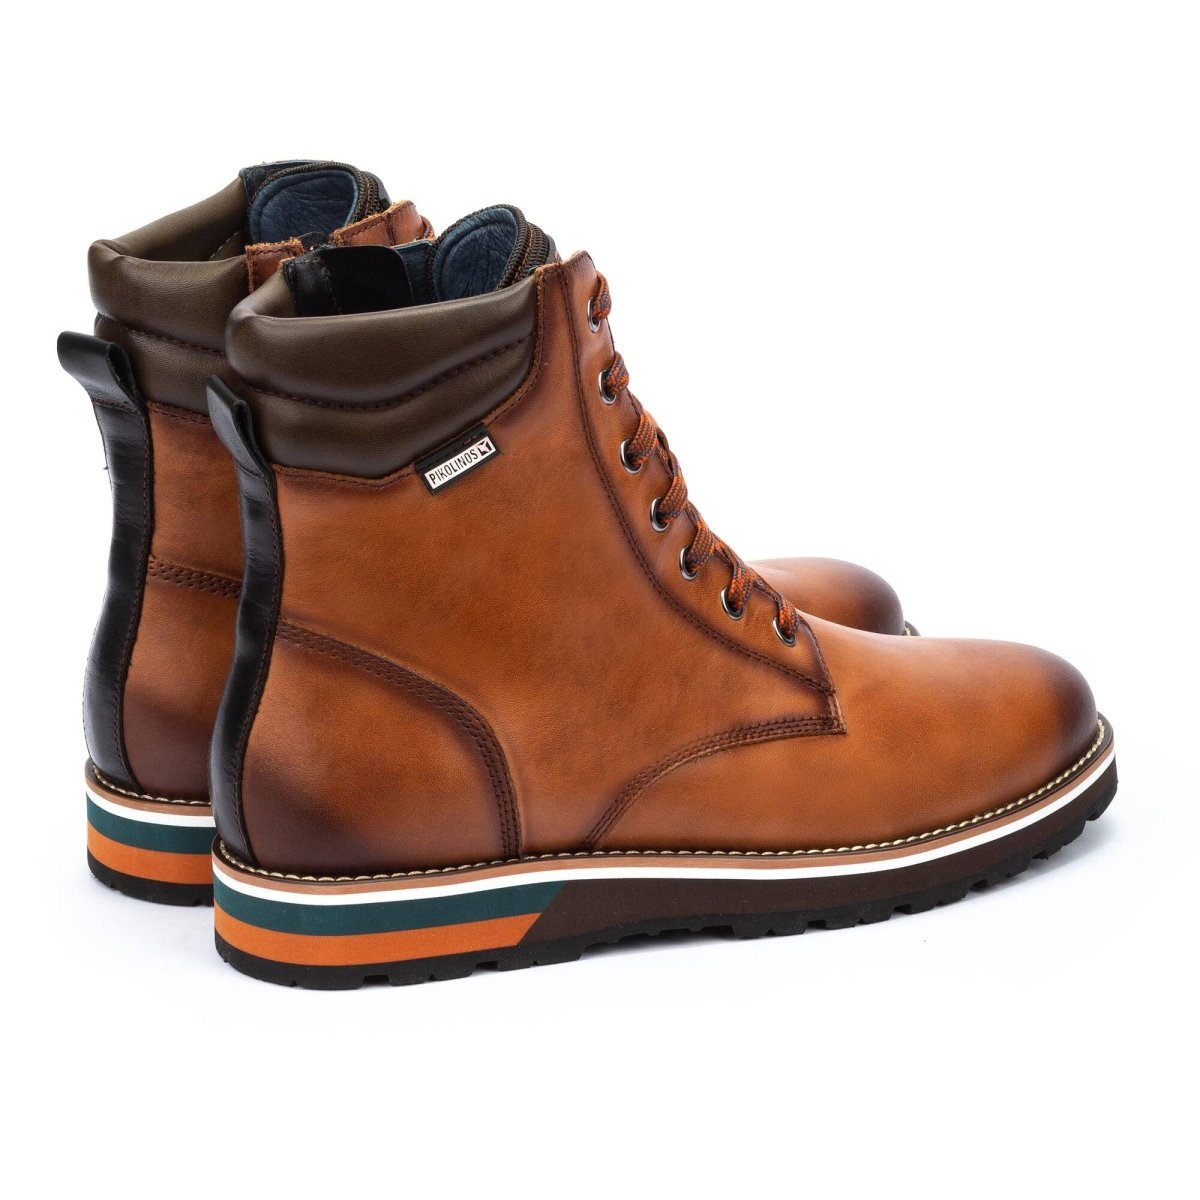 PIKOLINOS PIRINEOS M6S-8113C1 MEN'S LACE-UP ANKLE BOOTS IN BRANDY - TLW Shoes